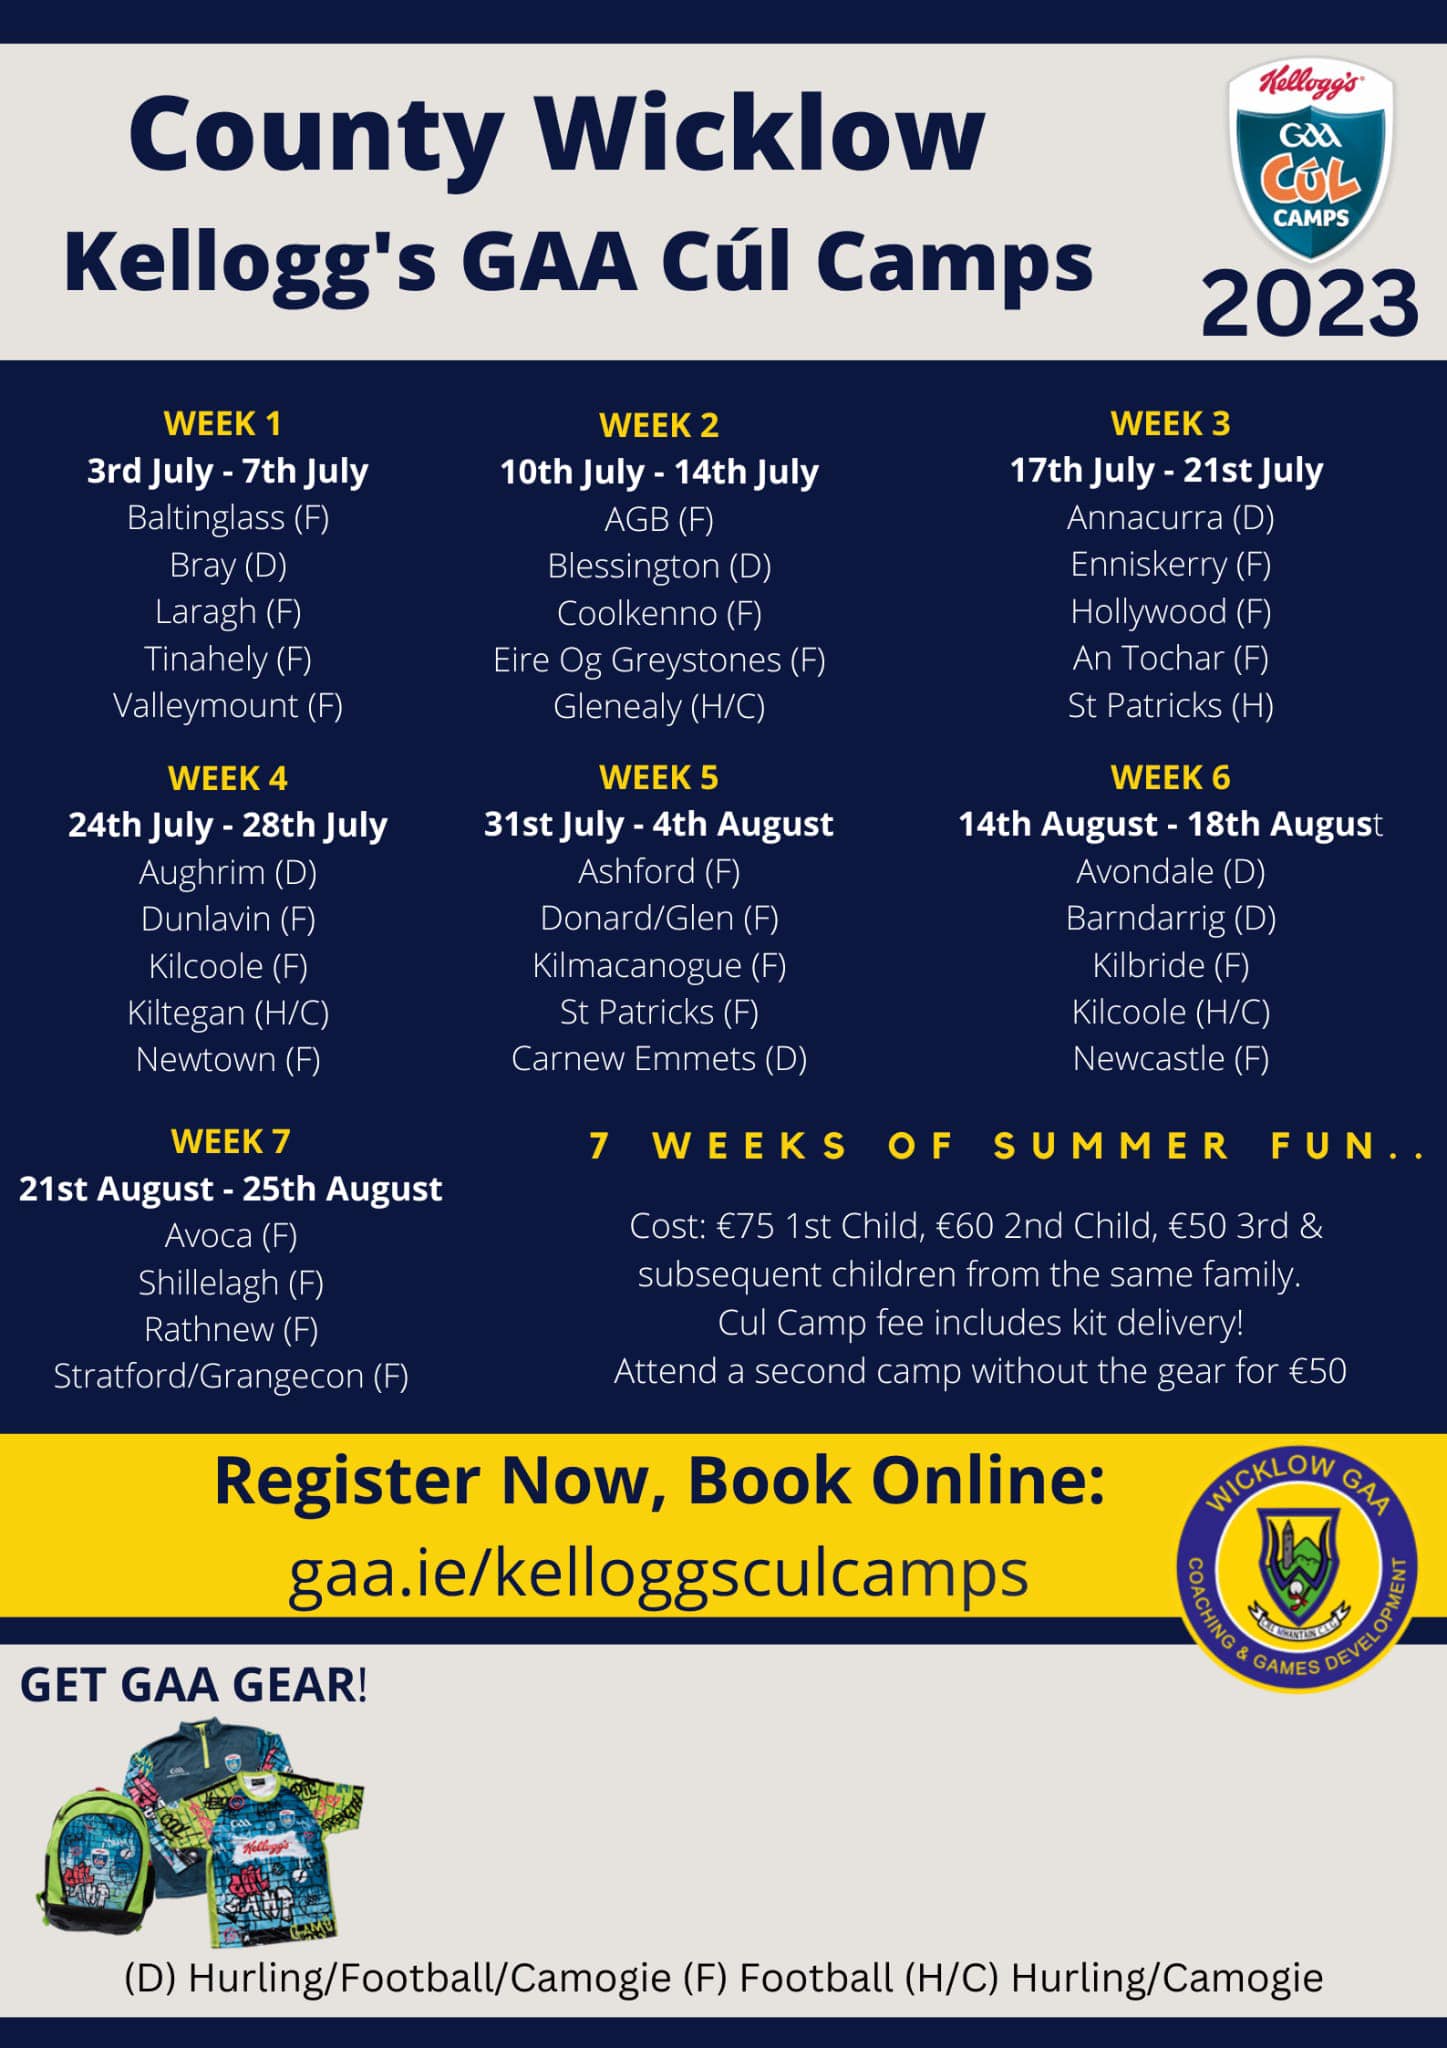 Cul Camps 2023 - Kilbride...Dates Confirmed -  August 14th to the 18th...bookings open